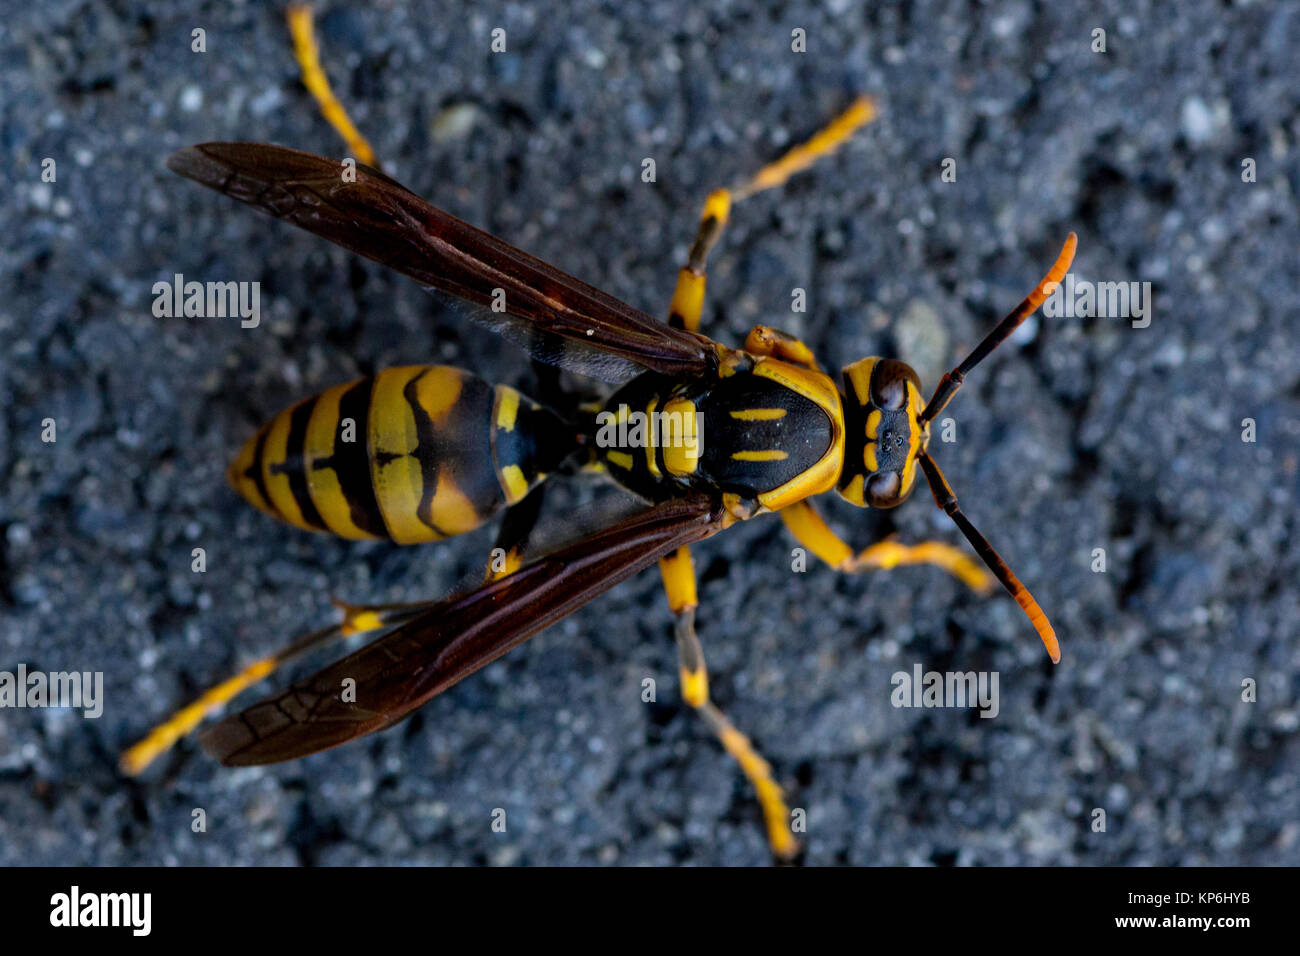 A wasp crawls along the sidewalk on a chilly November day in Japan. Stock Photo